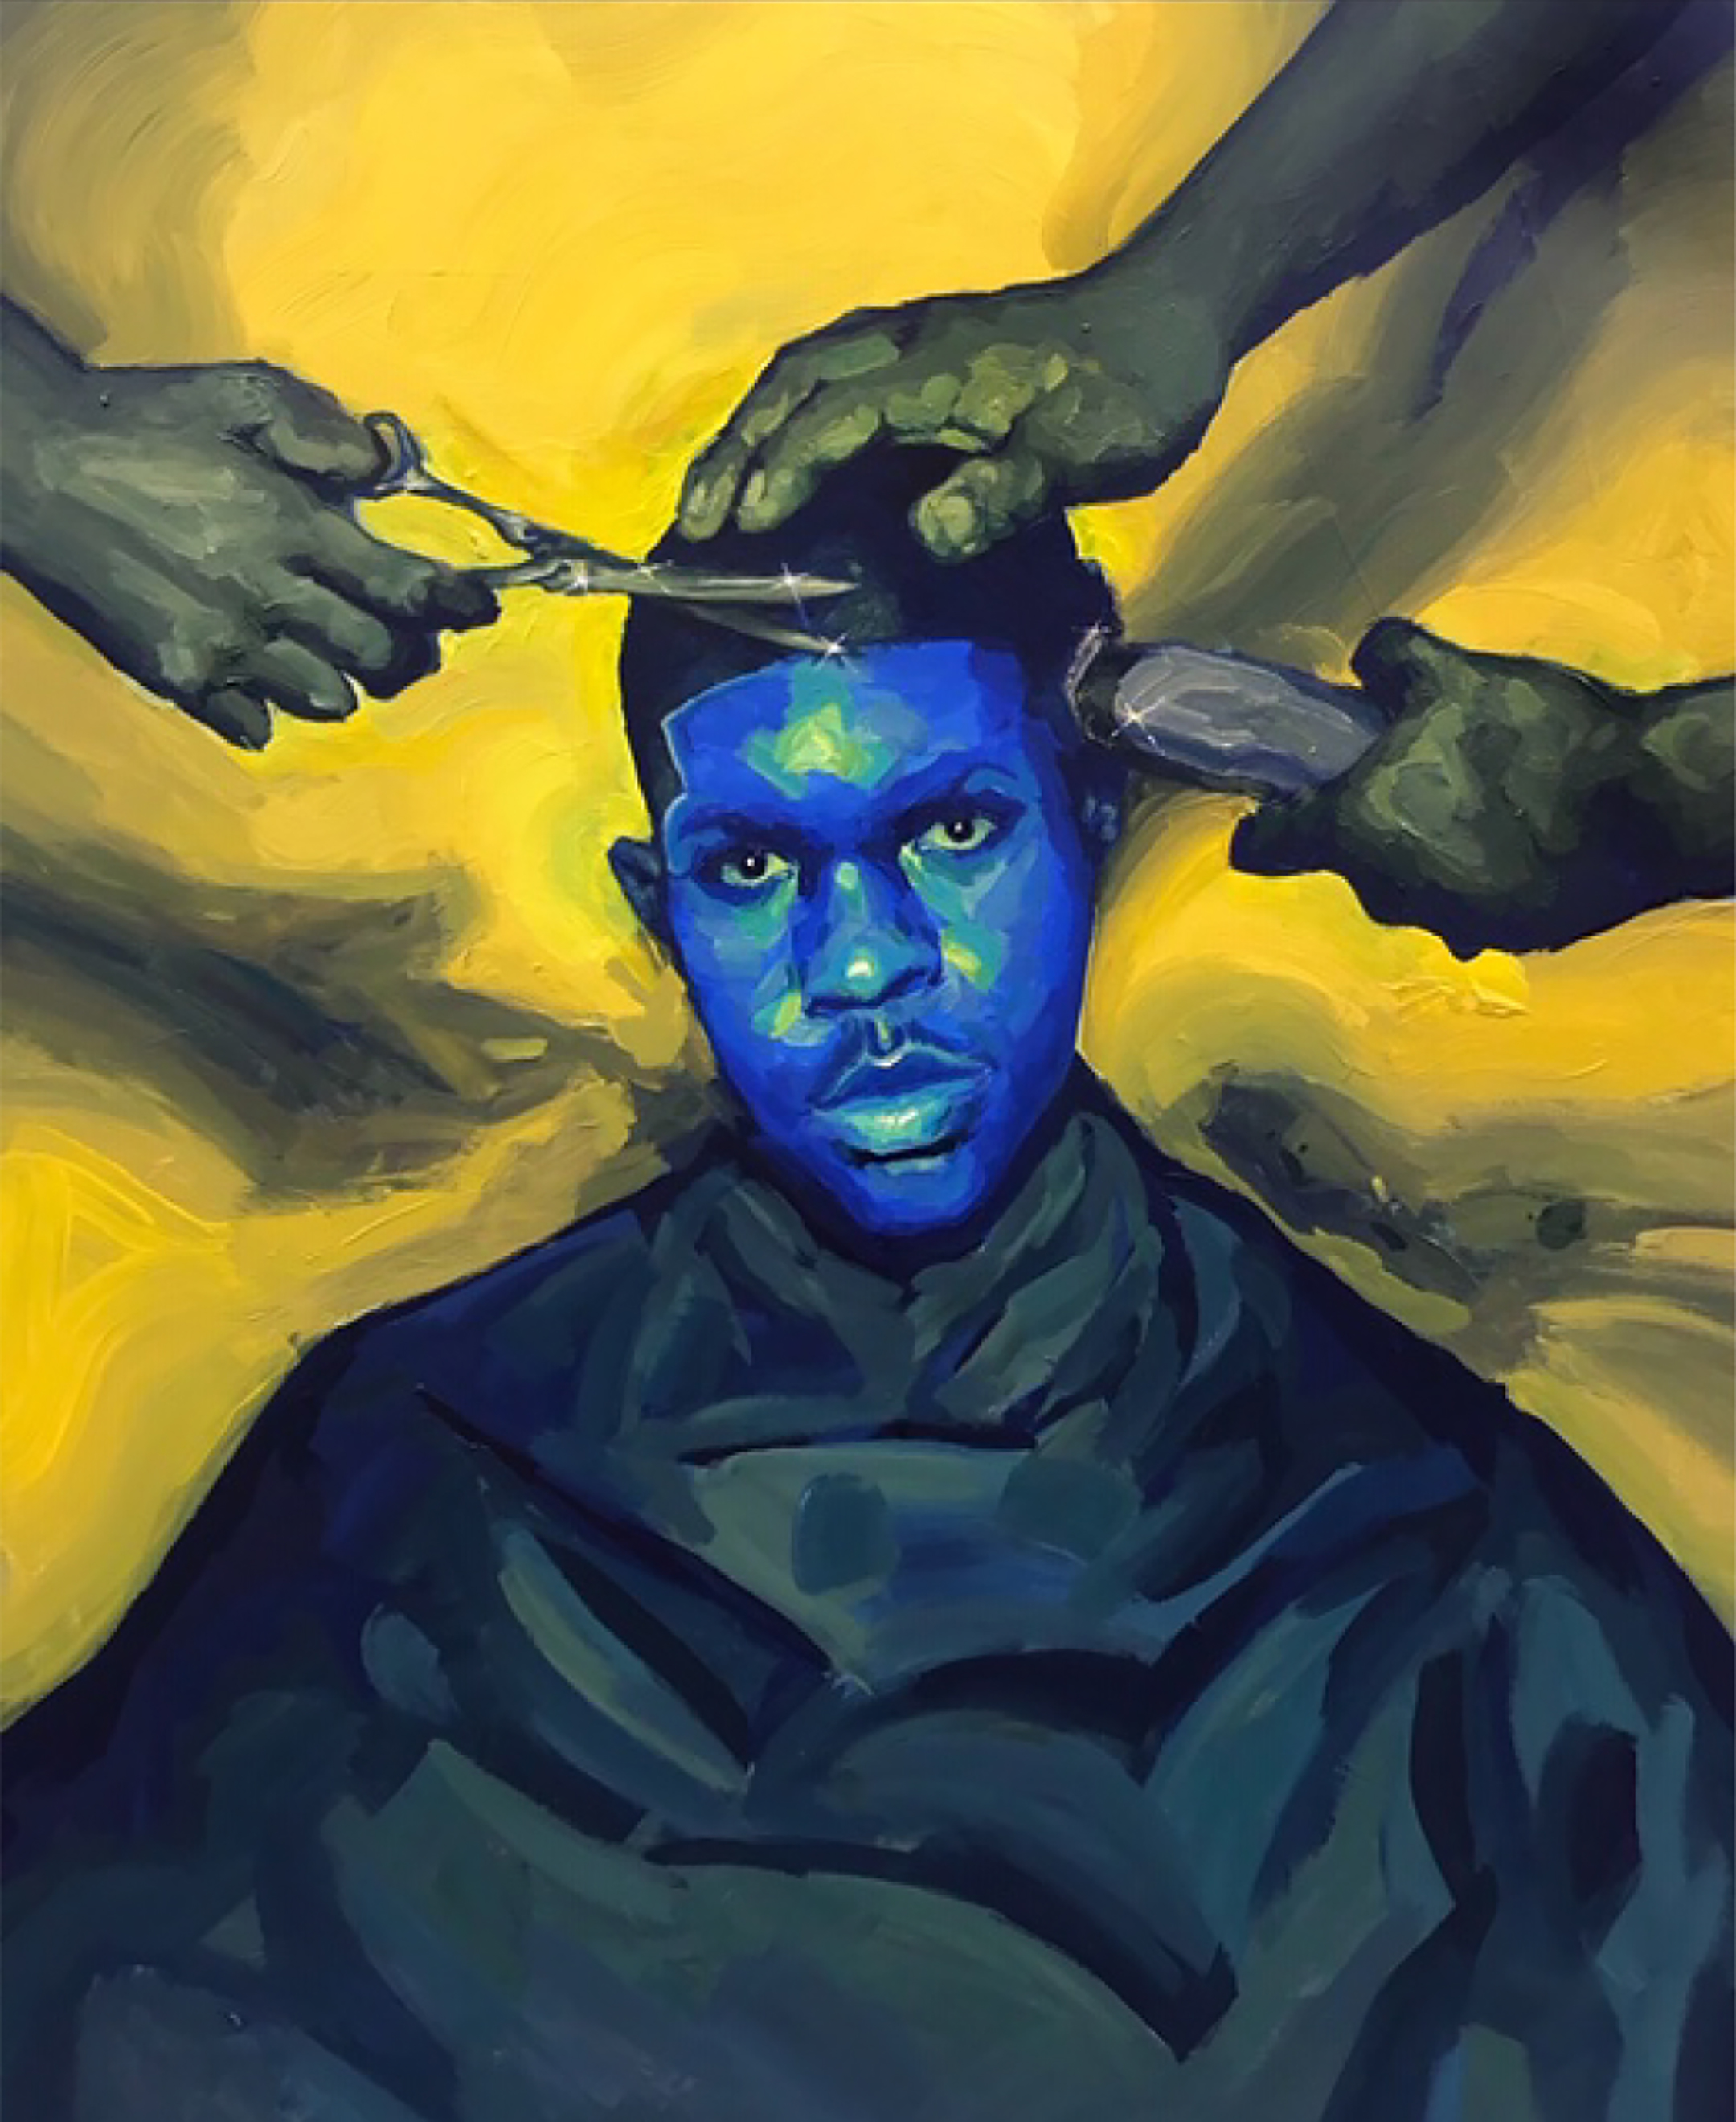 Painting of a young black man with a blue face, getting his hair cut by three hands, all against a yellow background